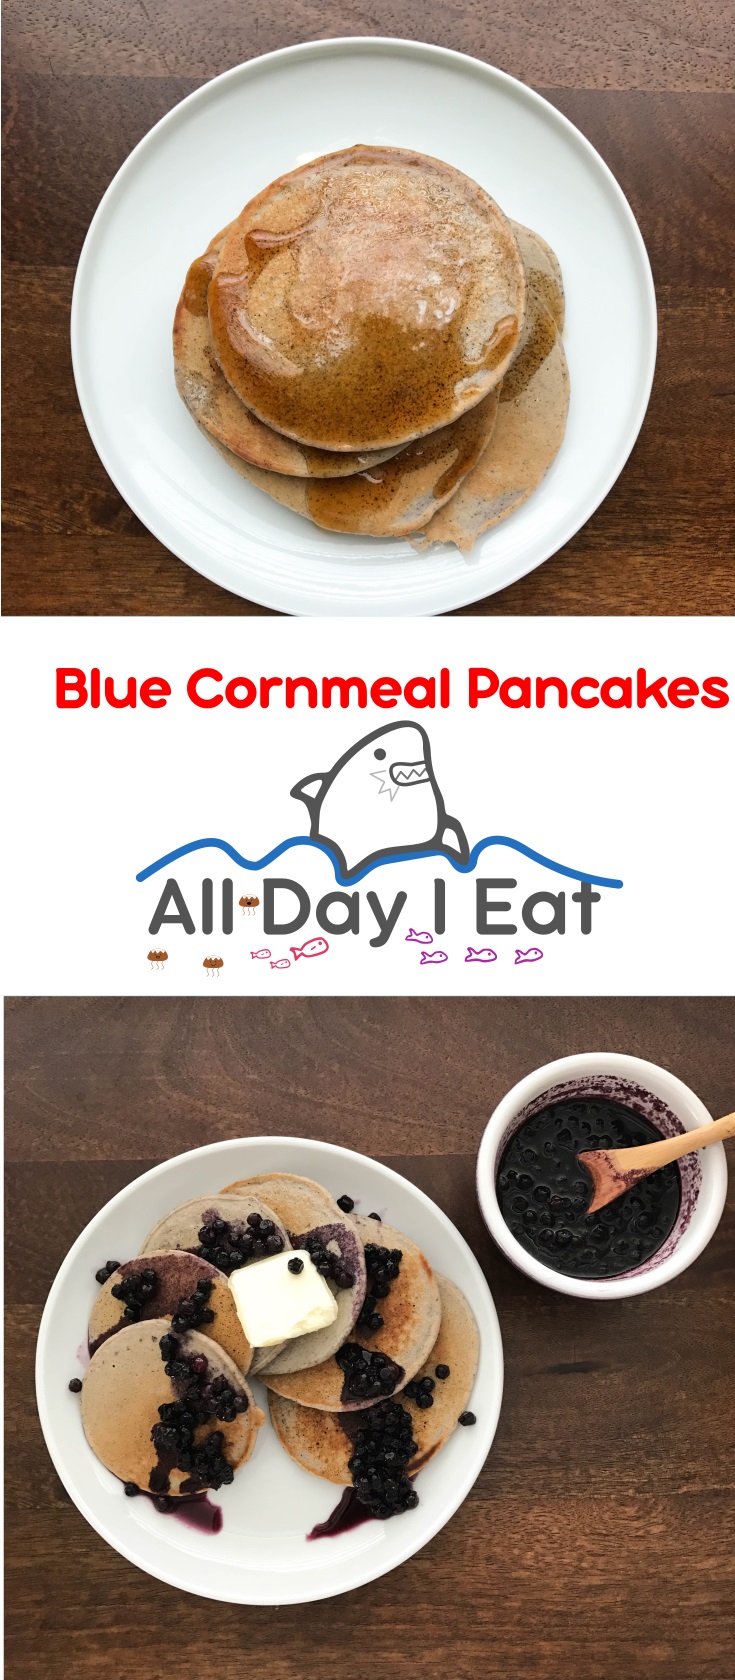 Blue Cornmeal Pancakes! An easy and delicious alternative to flour based pancakes! Cornmeal adds texture and nutrition to your favorite breakfast meal. | www.alldayieat.com